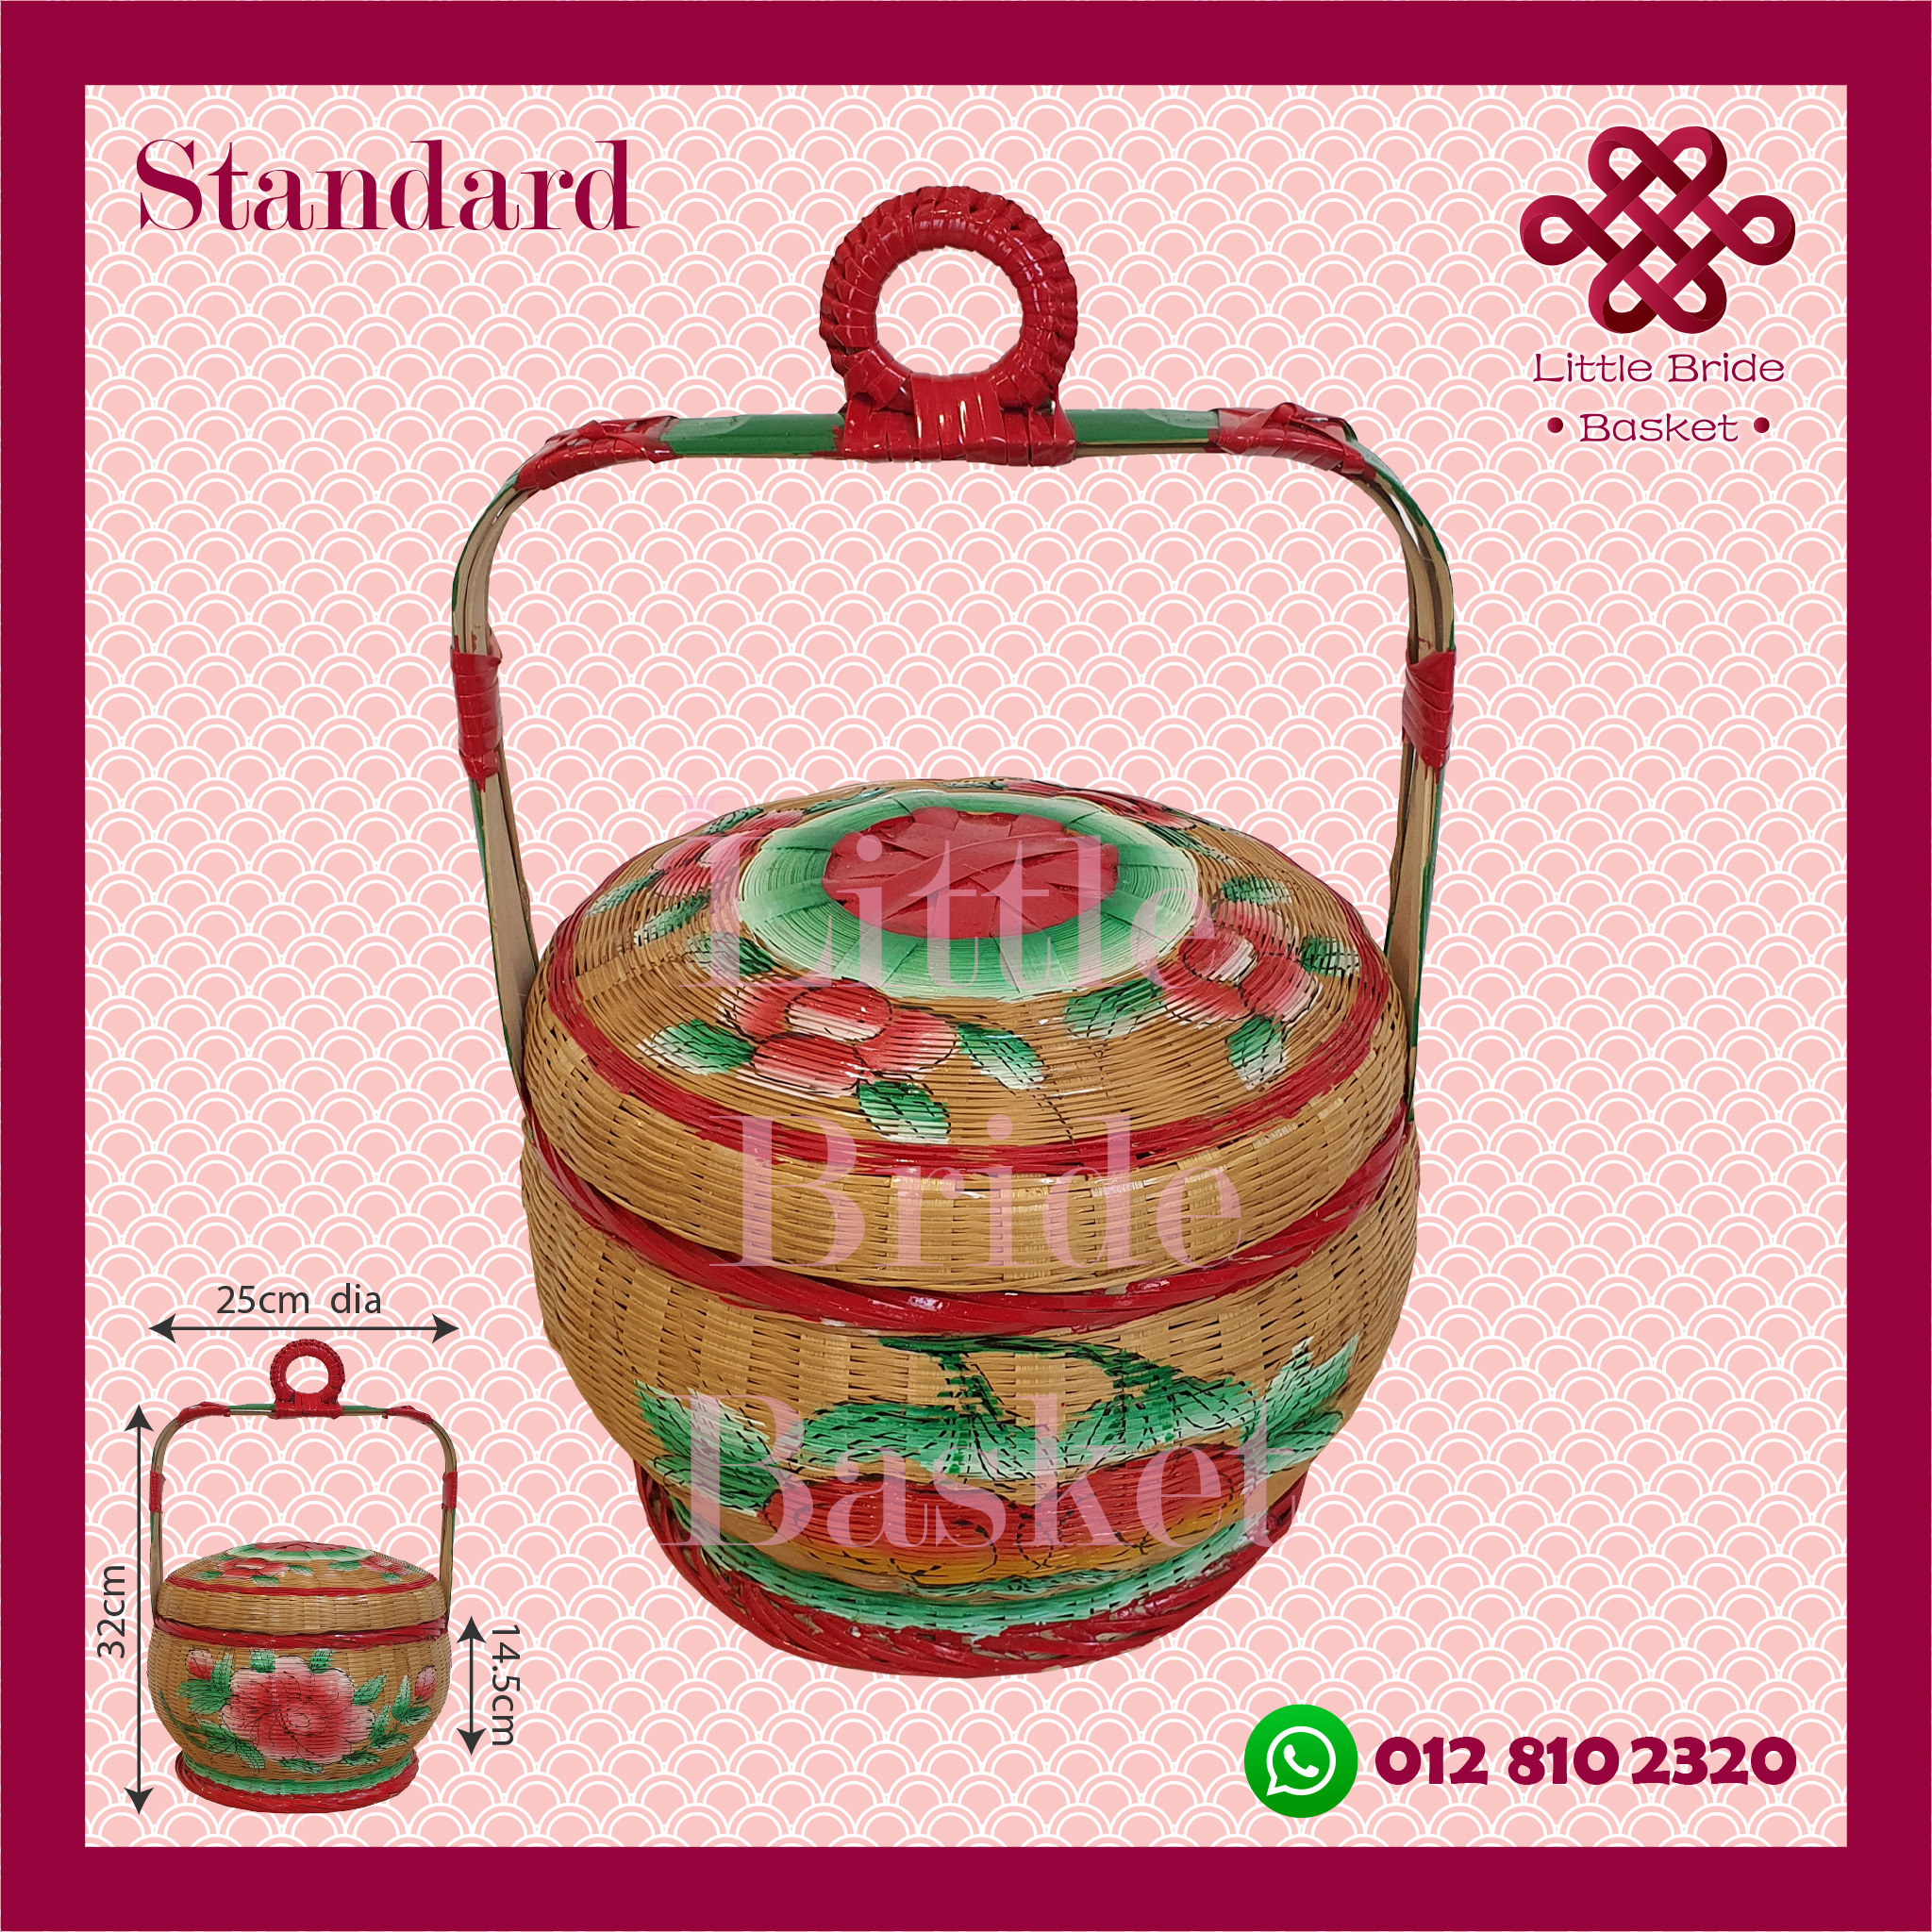 Standard Traditional Handcrafted Wedding Basket for Rent | Party & Events | RentSmart Asia | Renting Is The New Buying